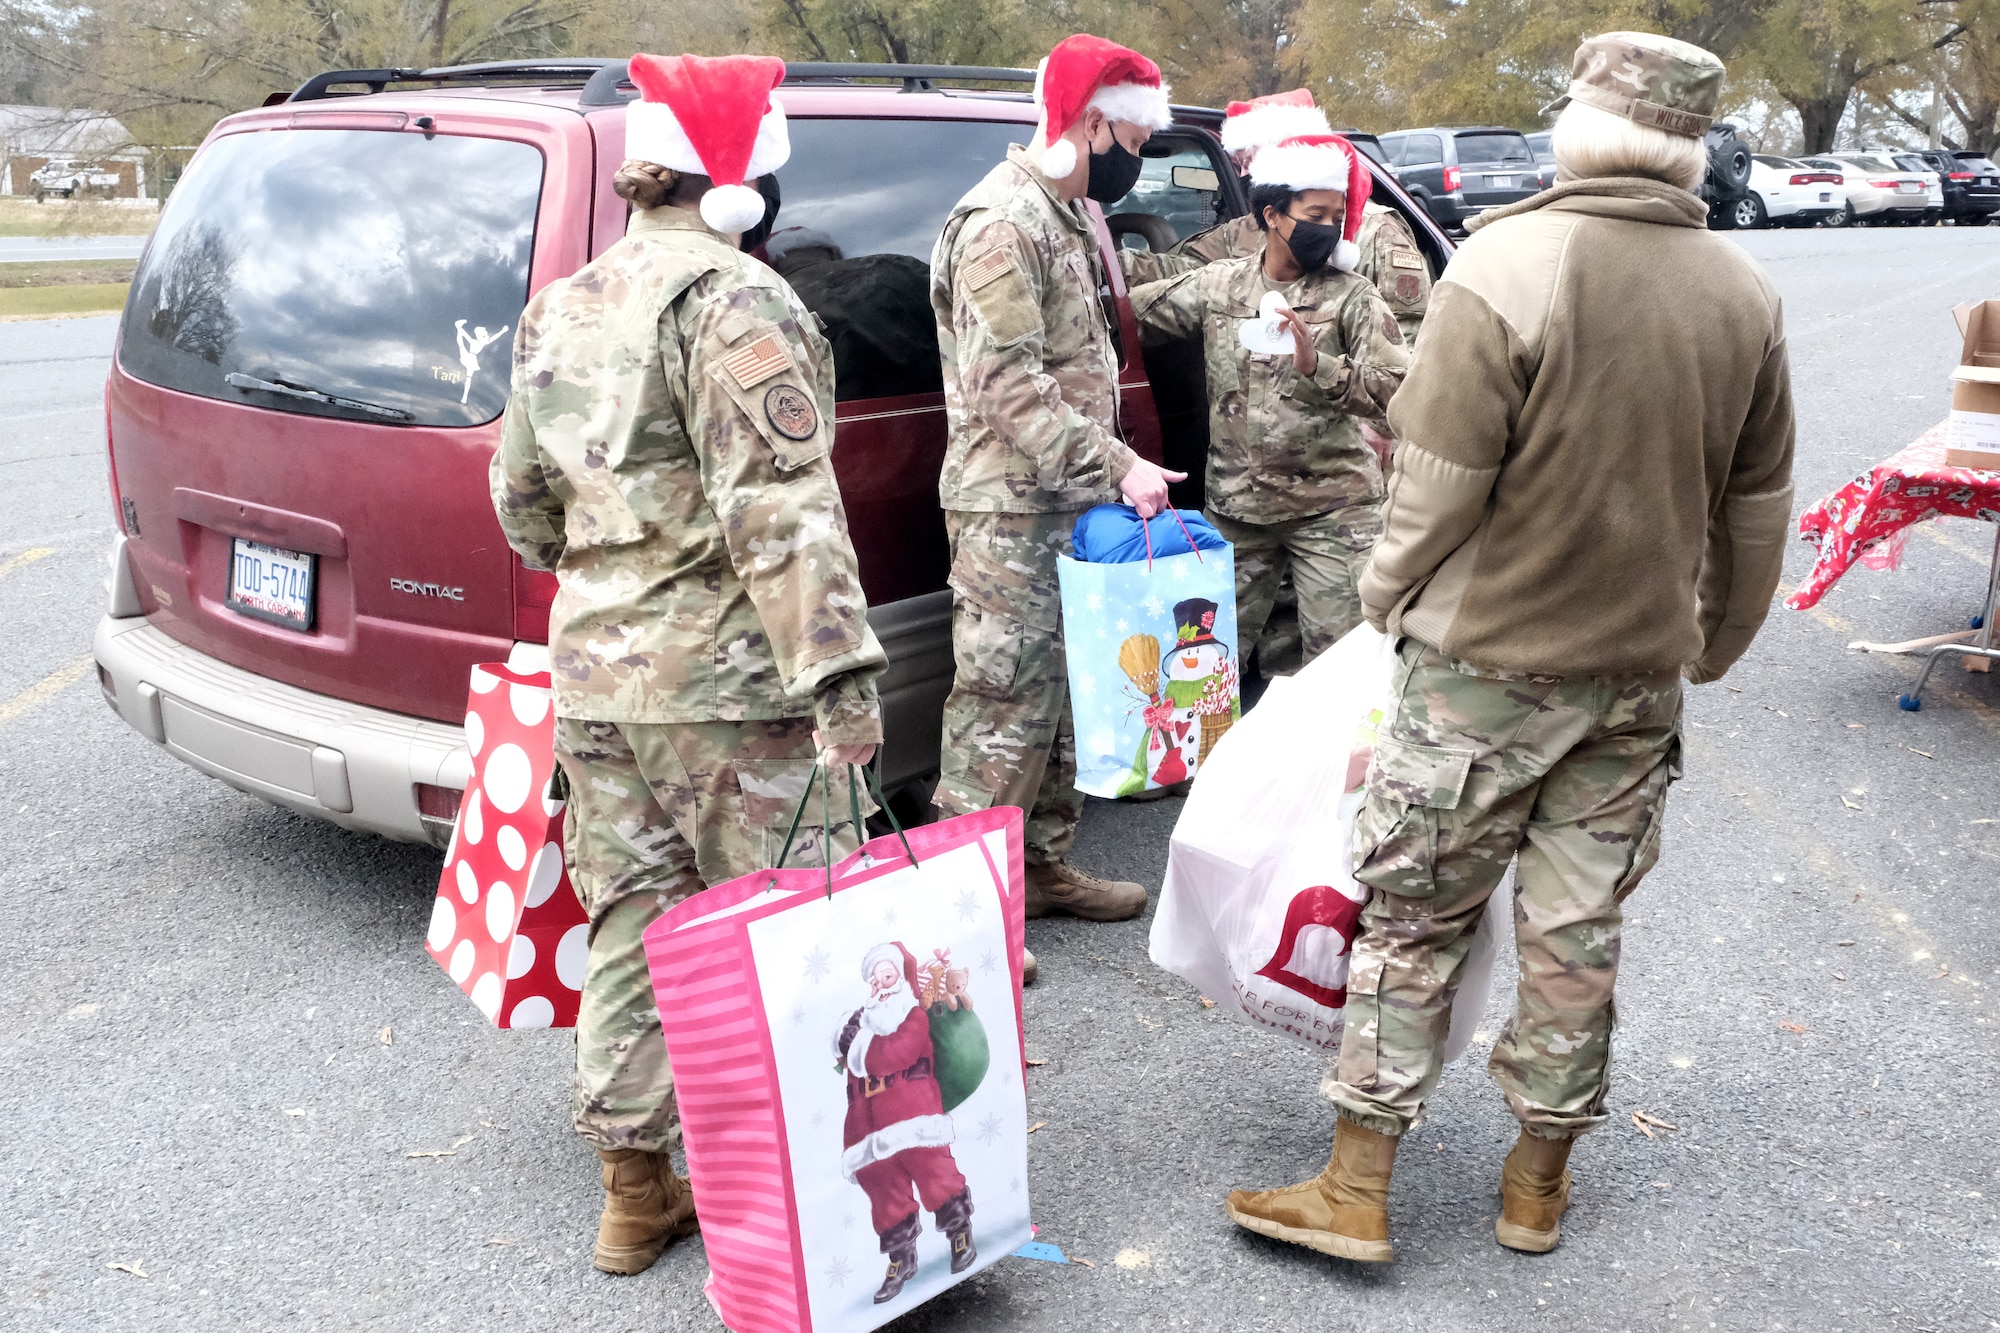 Members of the North Carolina Air National Guard assist with loading presents and food into a vehicle during Operation Santa Claus held at Oakboro Elementary School in Oakboro, N.C. Dec. 13, 2020. The Chapter 7 organization within the North Carolina Air National Guard hosts the Annual Operation Santa Claus event as a way to reach out to the community and spread holiday cheer and spirit. Chapter 7 and volunteers passed out nearly 100 boxes of food donated by the local Food Lion as well as 50 presents designated to students within the school.